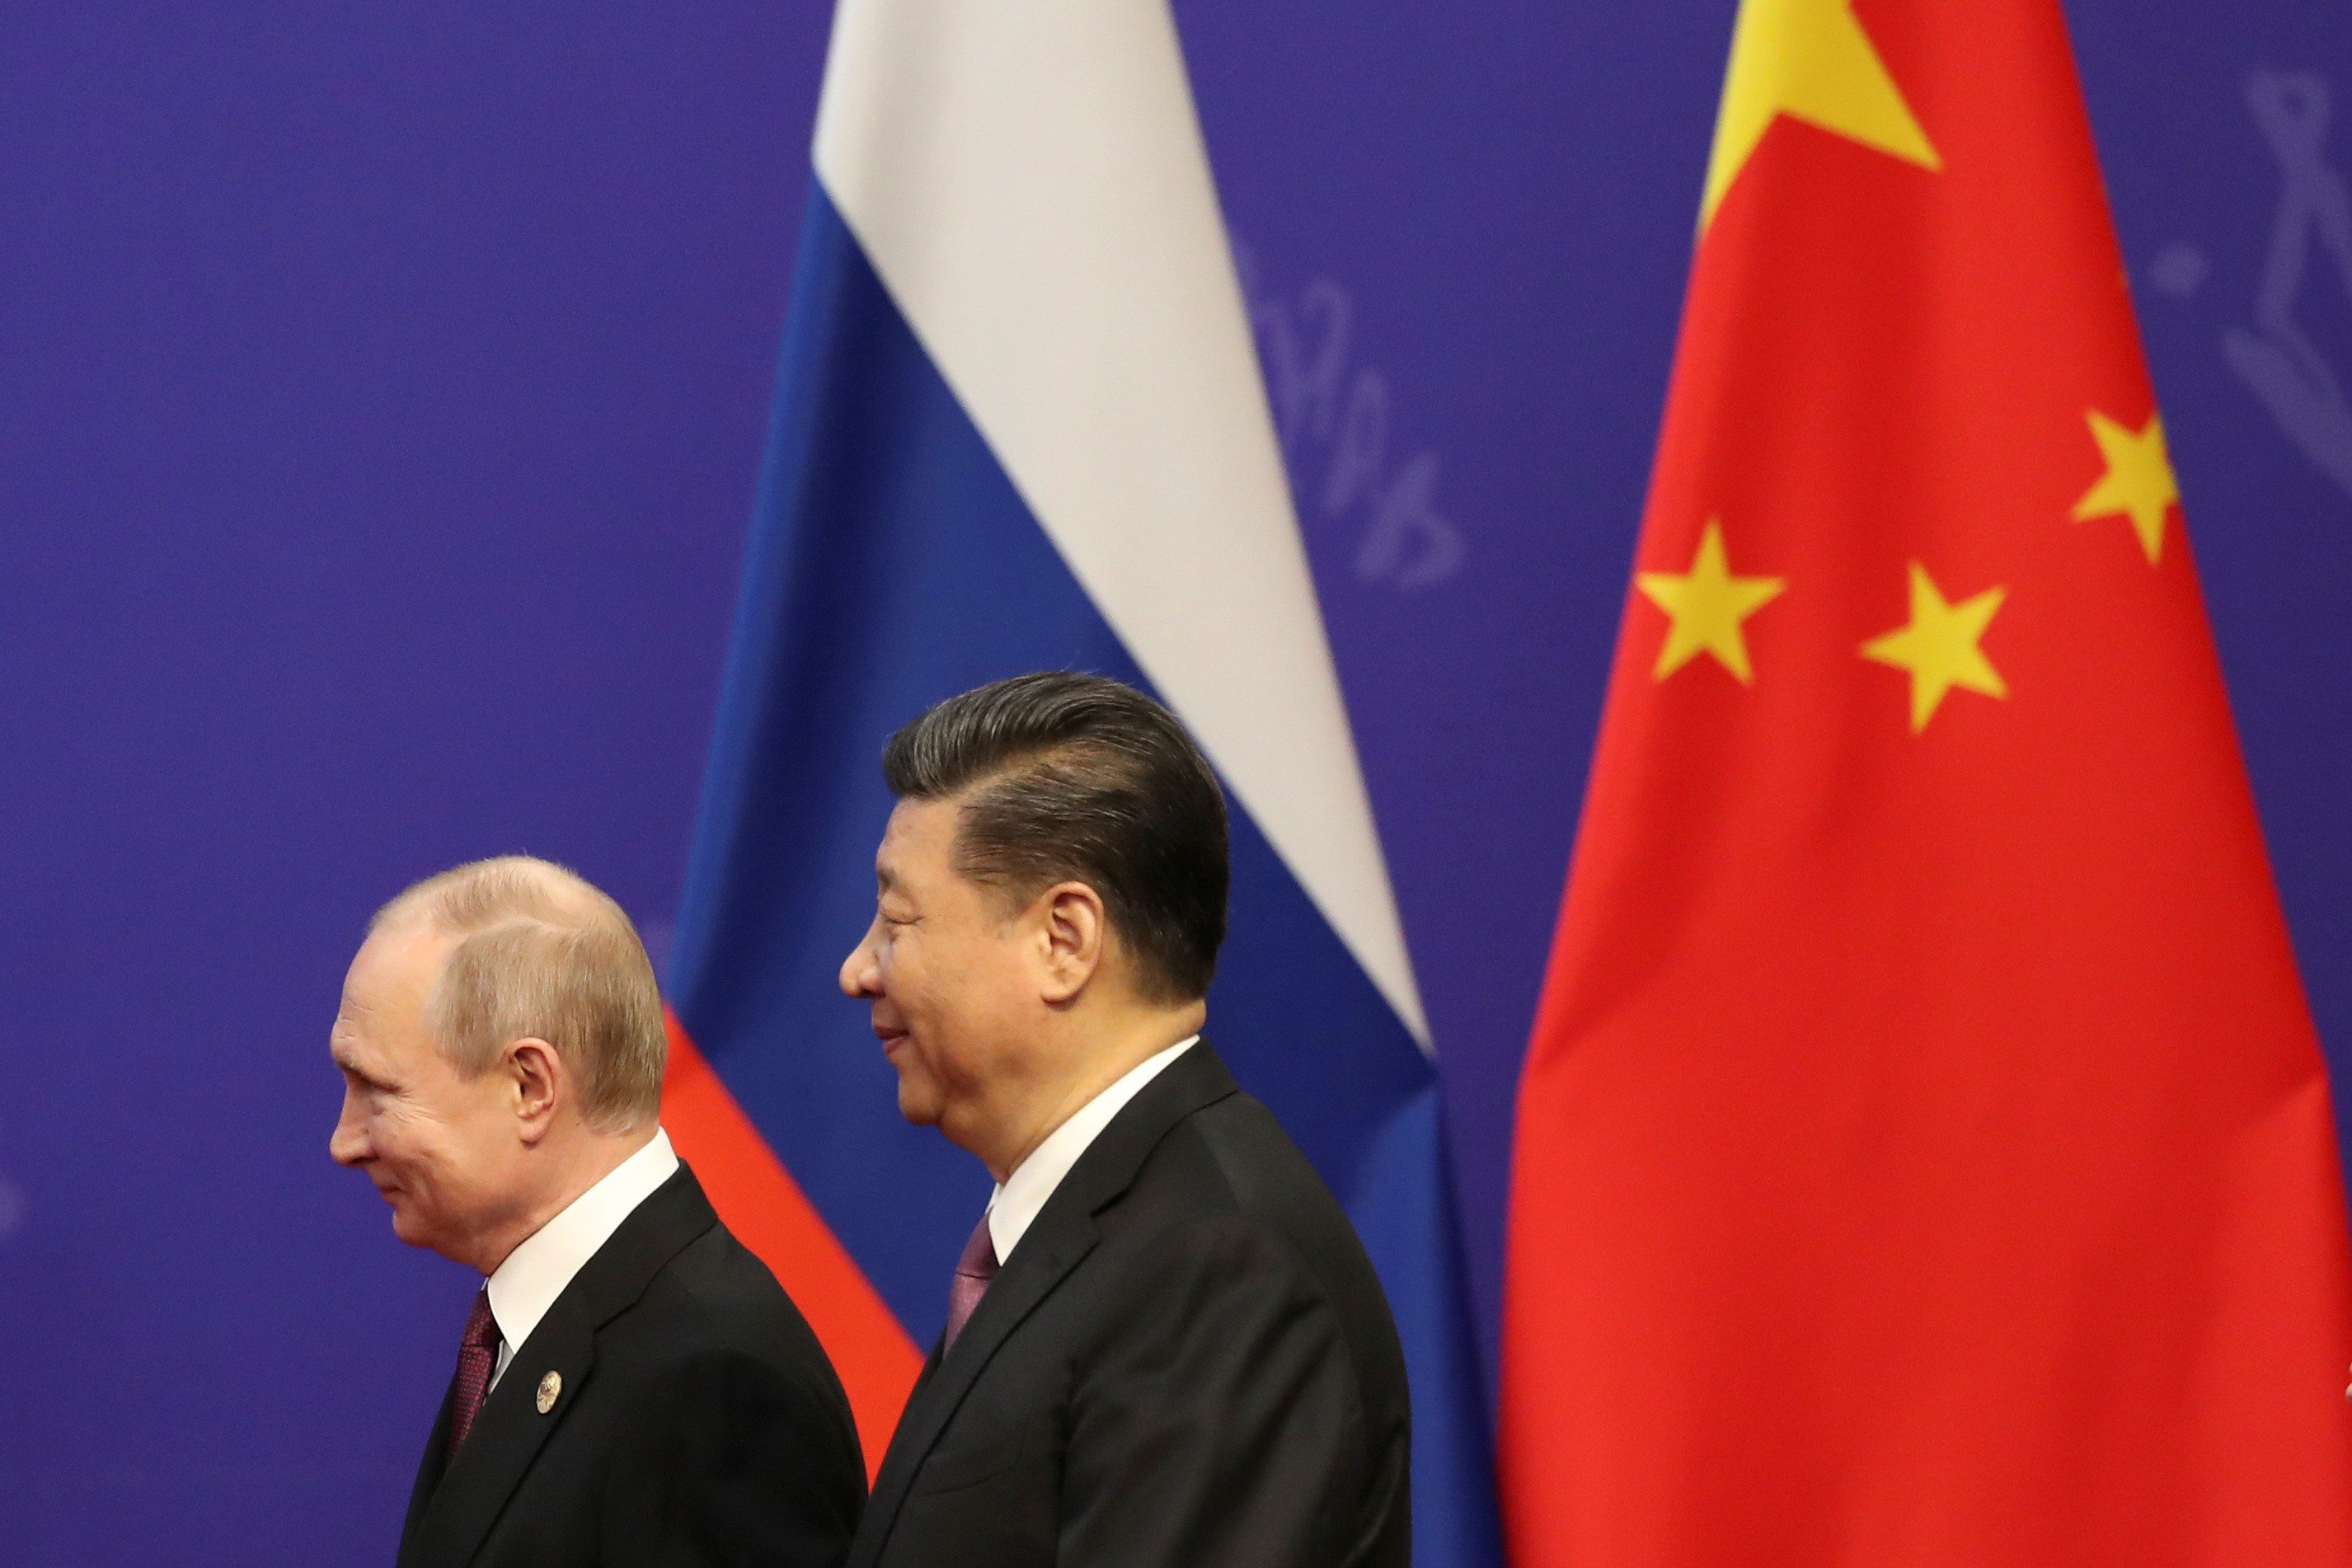 Chinese President Xi Jinping and his Russian counterpart Vladimir Putin have pledged to further improve bilateral ties. Photo: Reuters